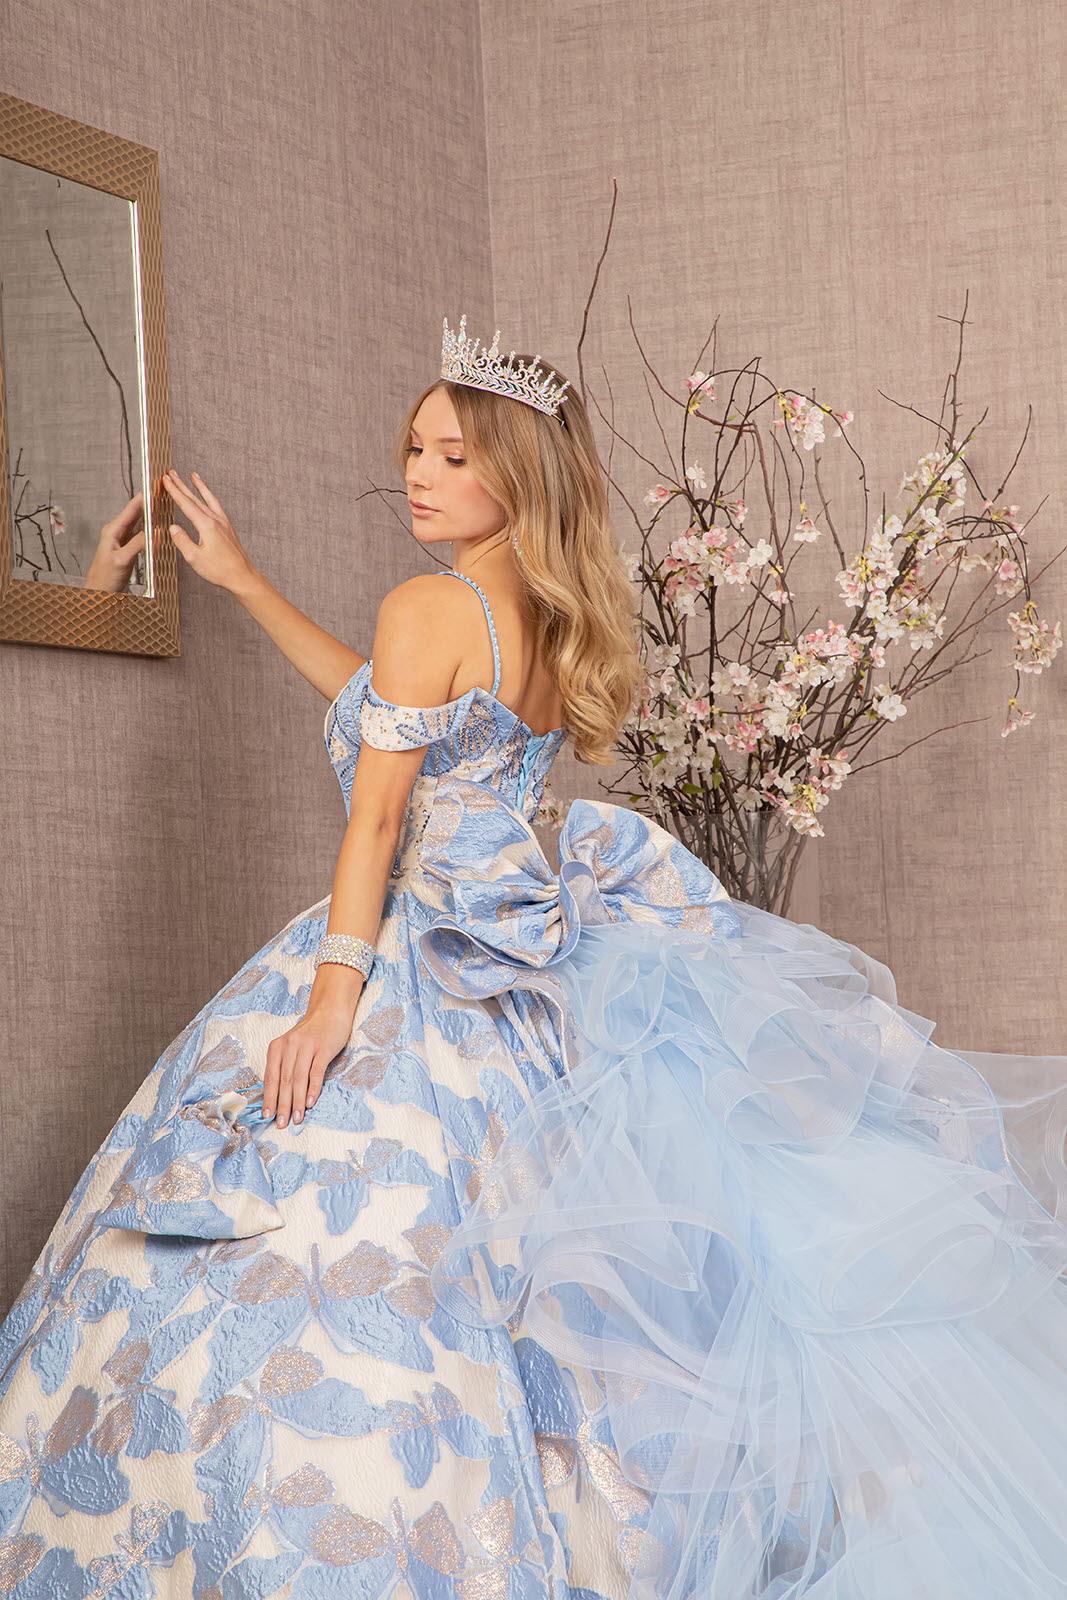 blue Cinderella ball gown | inspired by the 2015 Disney movi… | Flickr